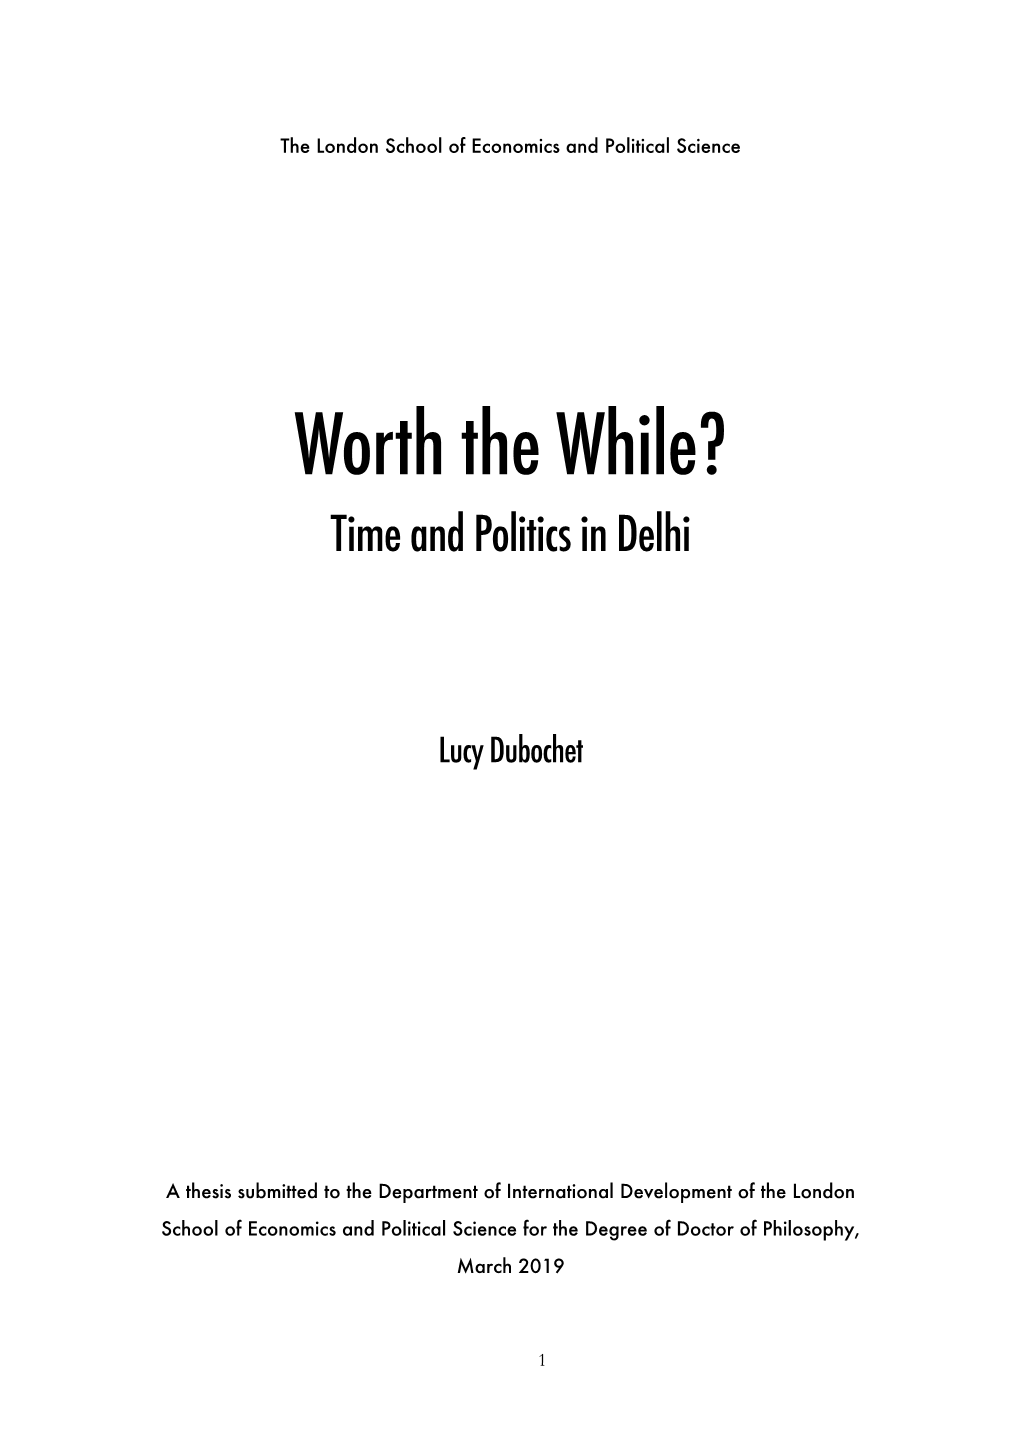 Worth the While? Time and Politics in Delhi